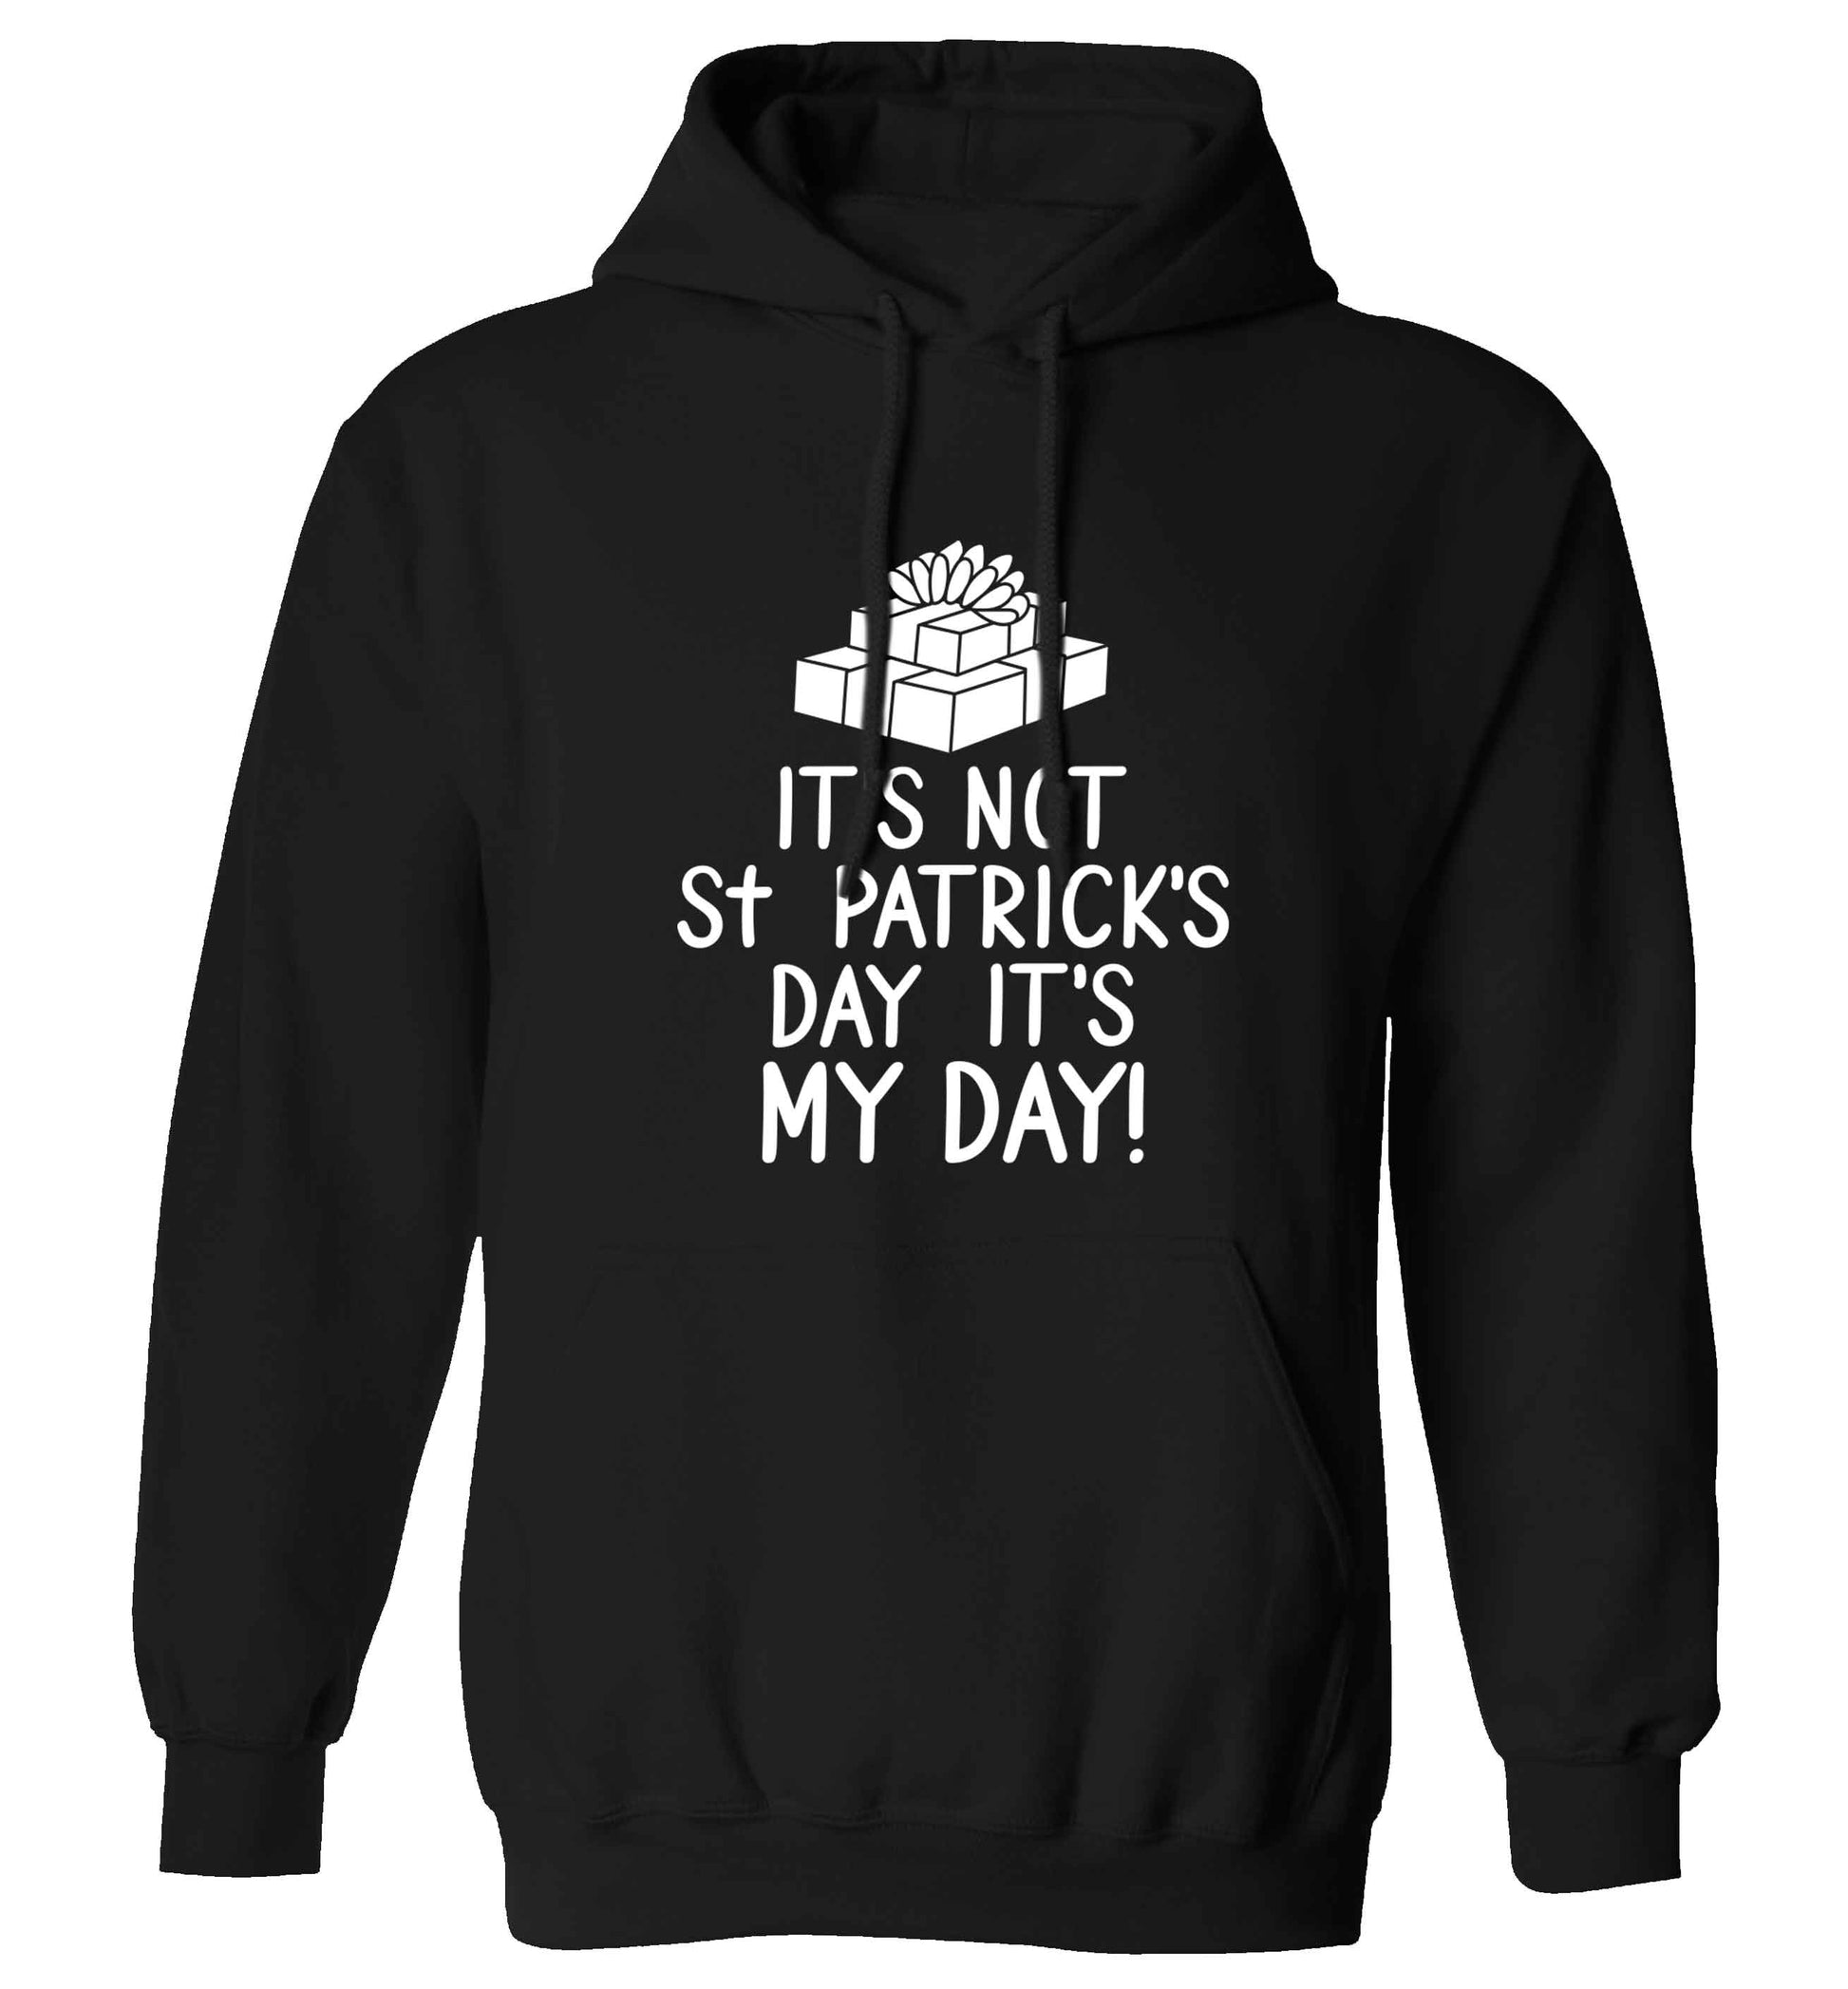 Funny gifts for your mum on mother's dayor her birthday! It's not St Patricks day it's my day adults unisex black hoodie 2XL